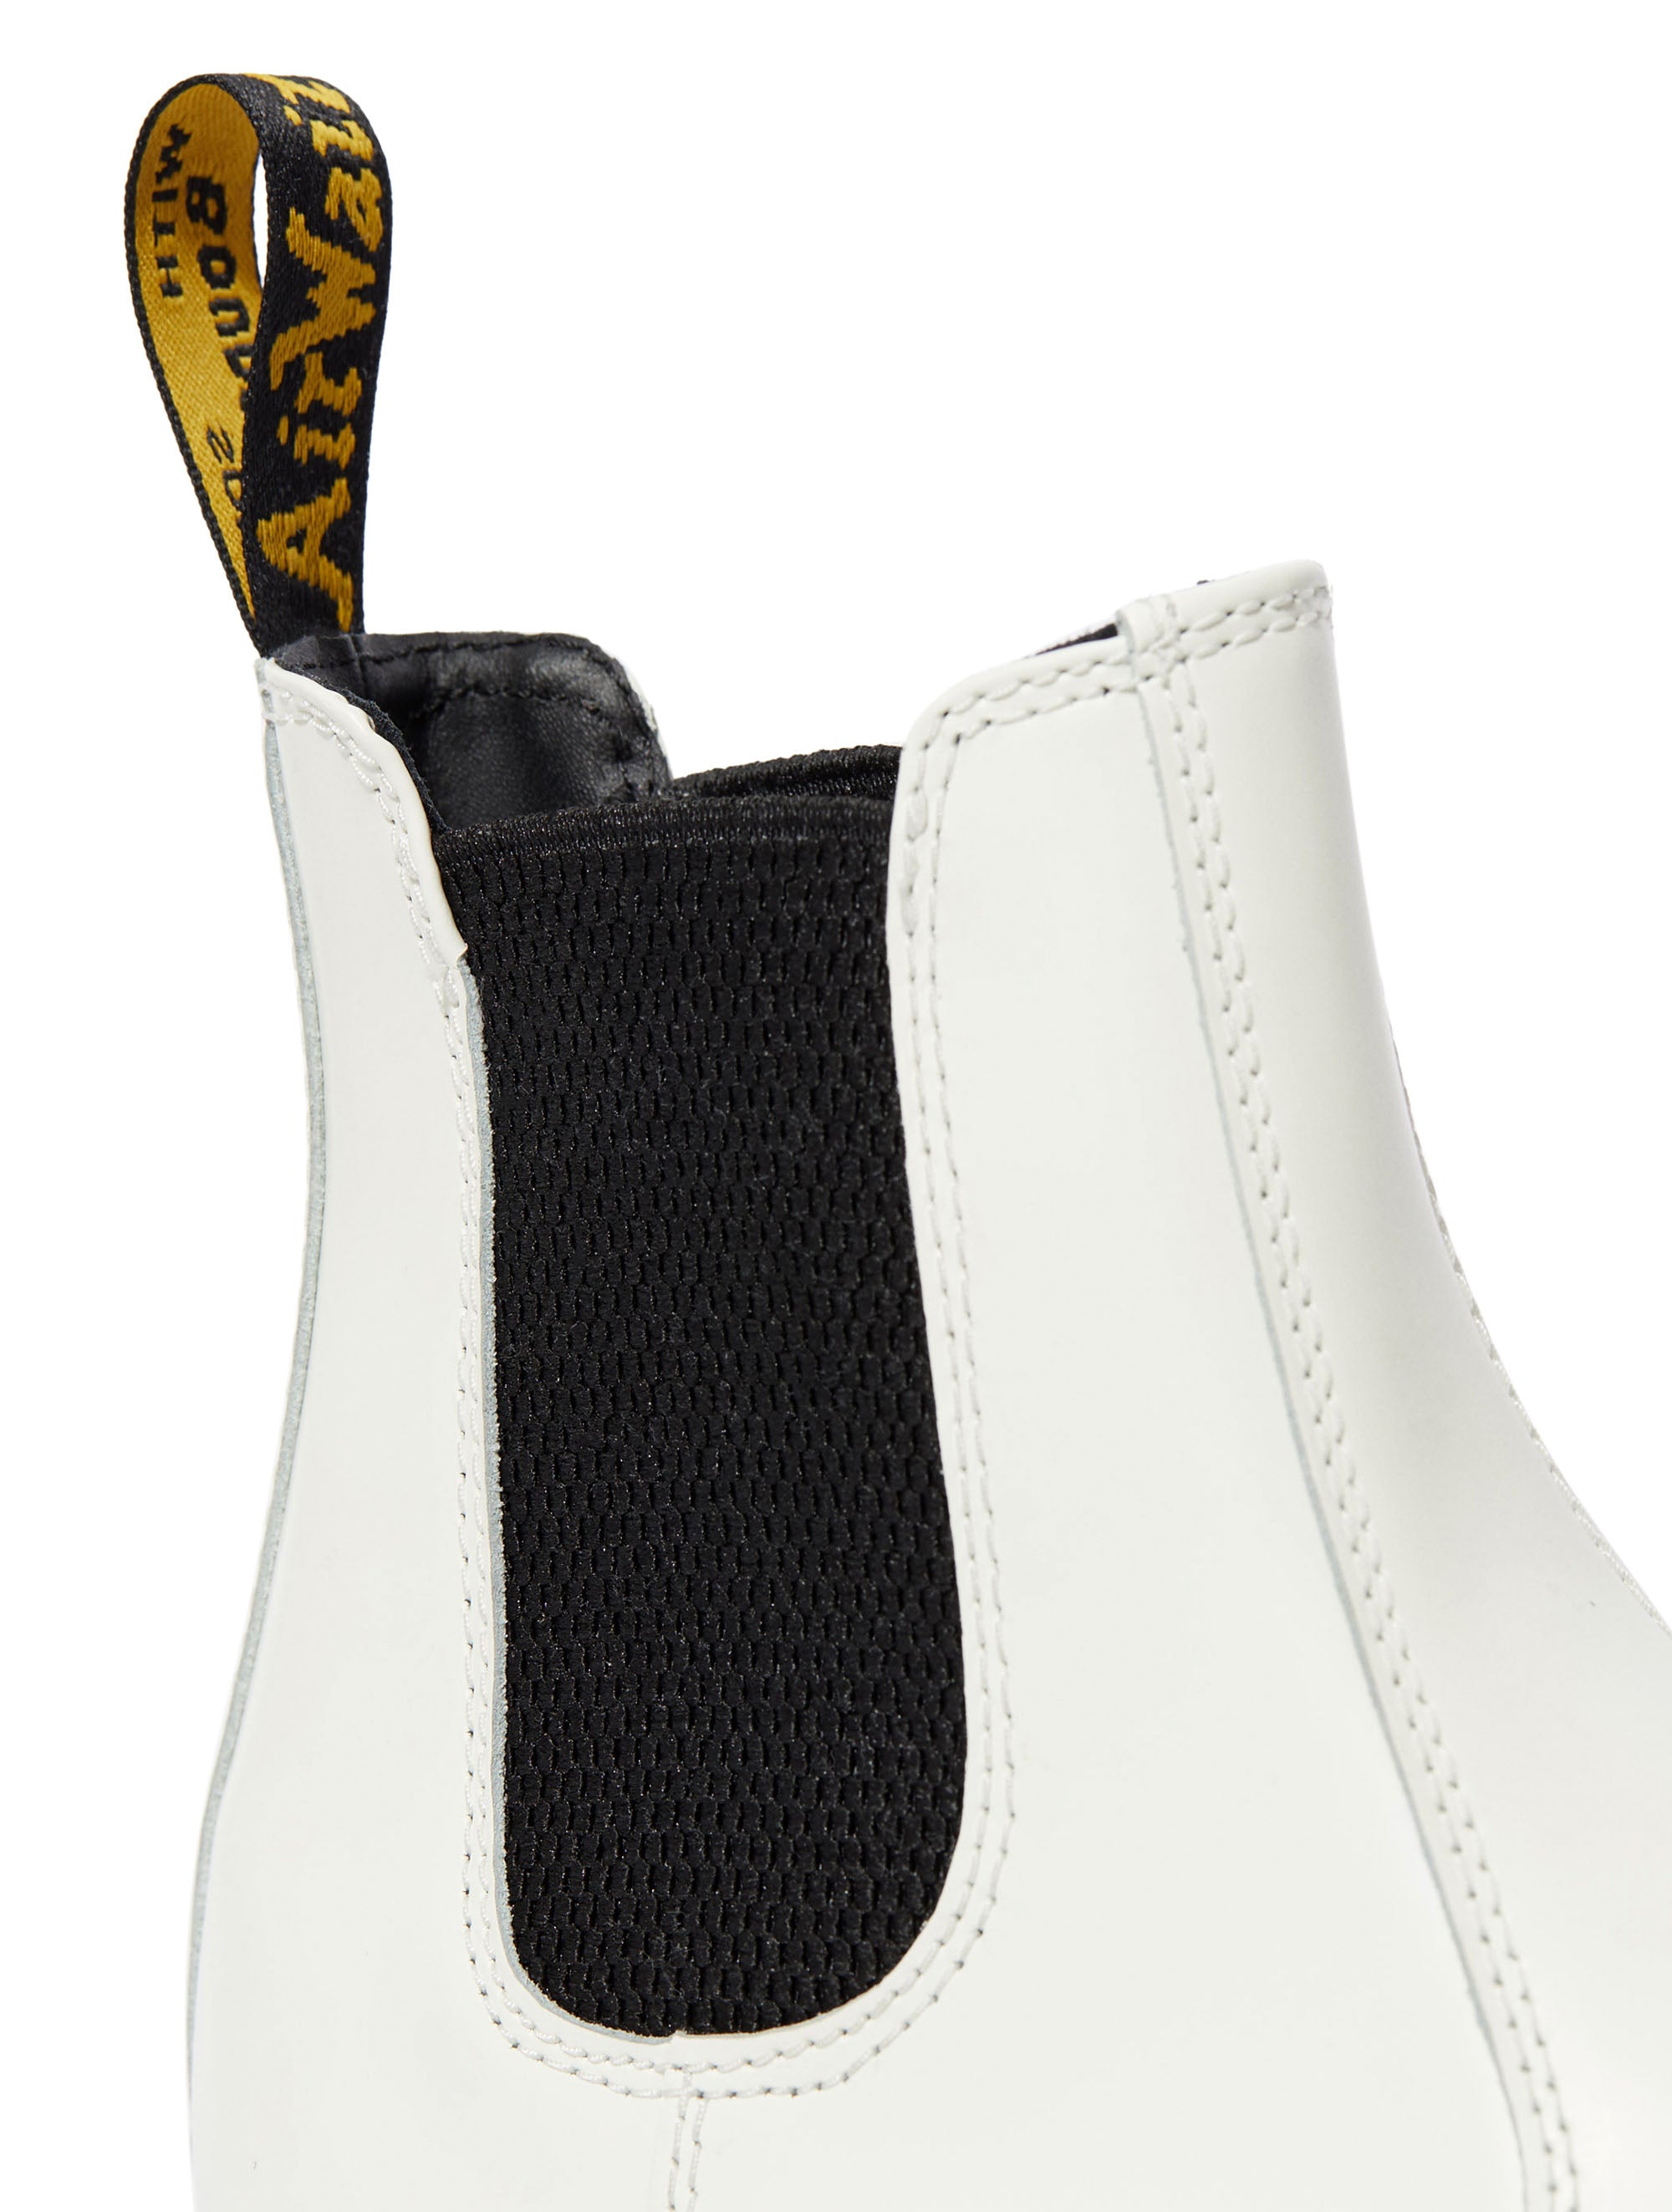 Dr. Martens 2976 Chelsea Quad Boot in White (Final Sale)